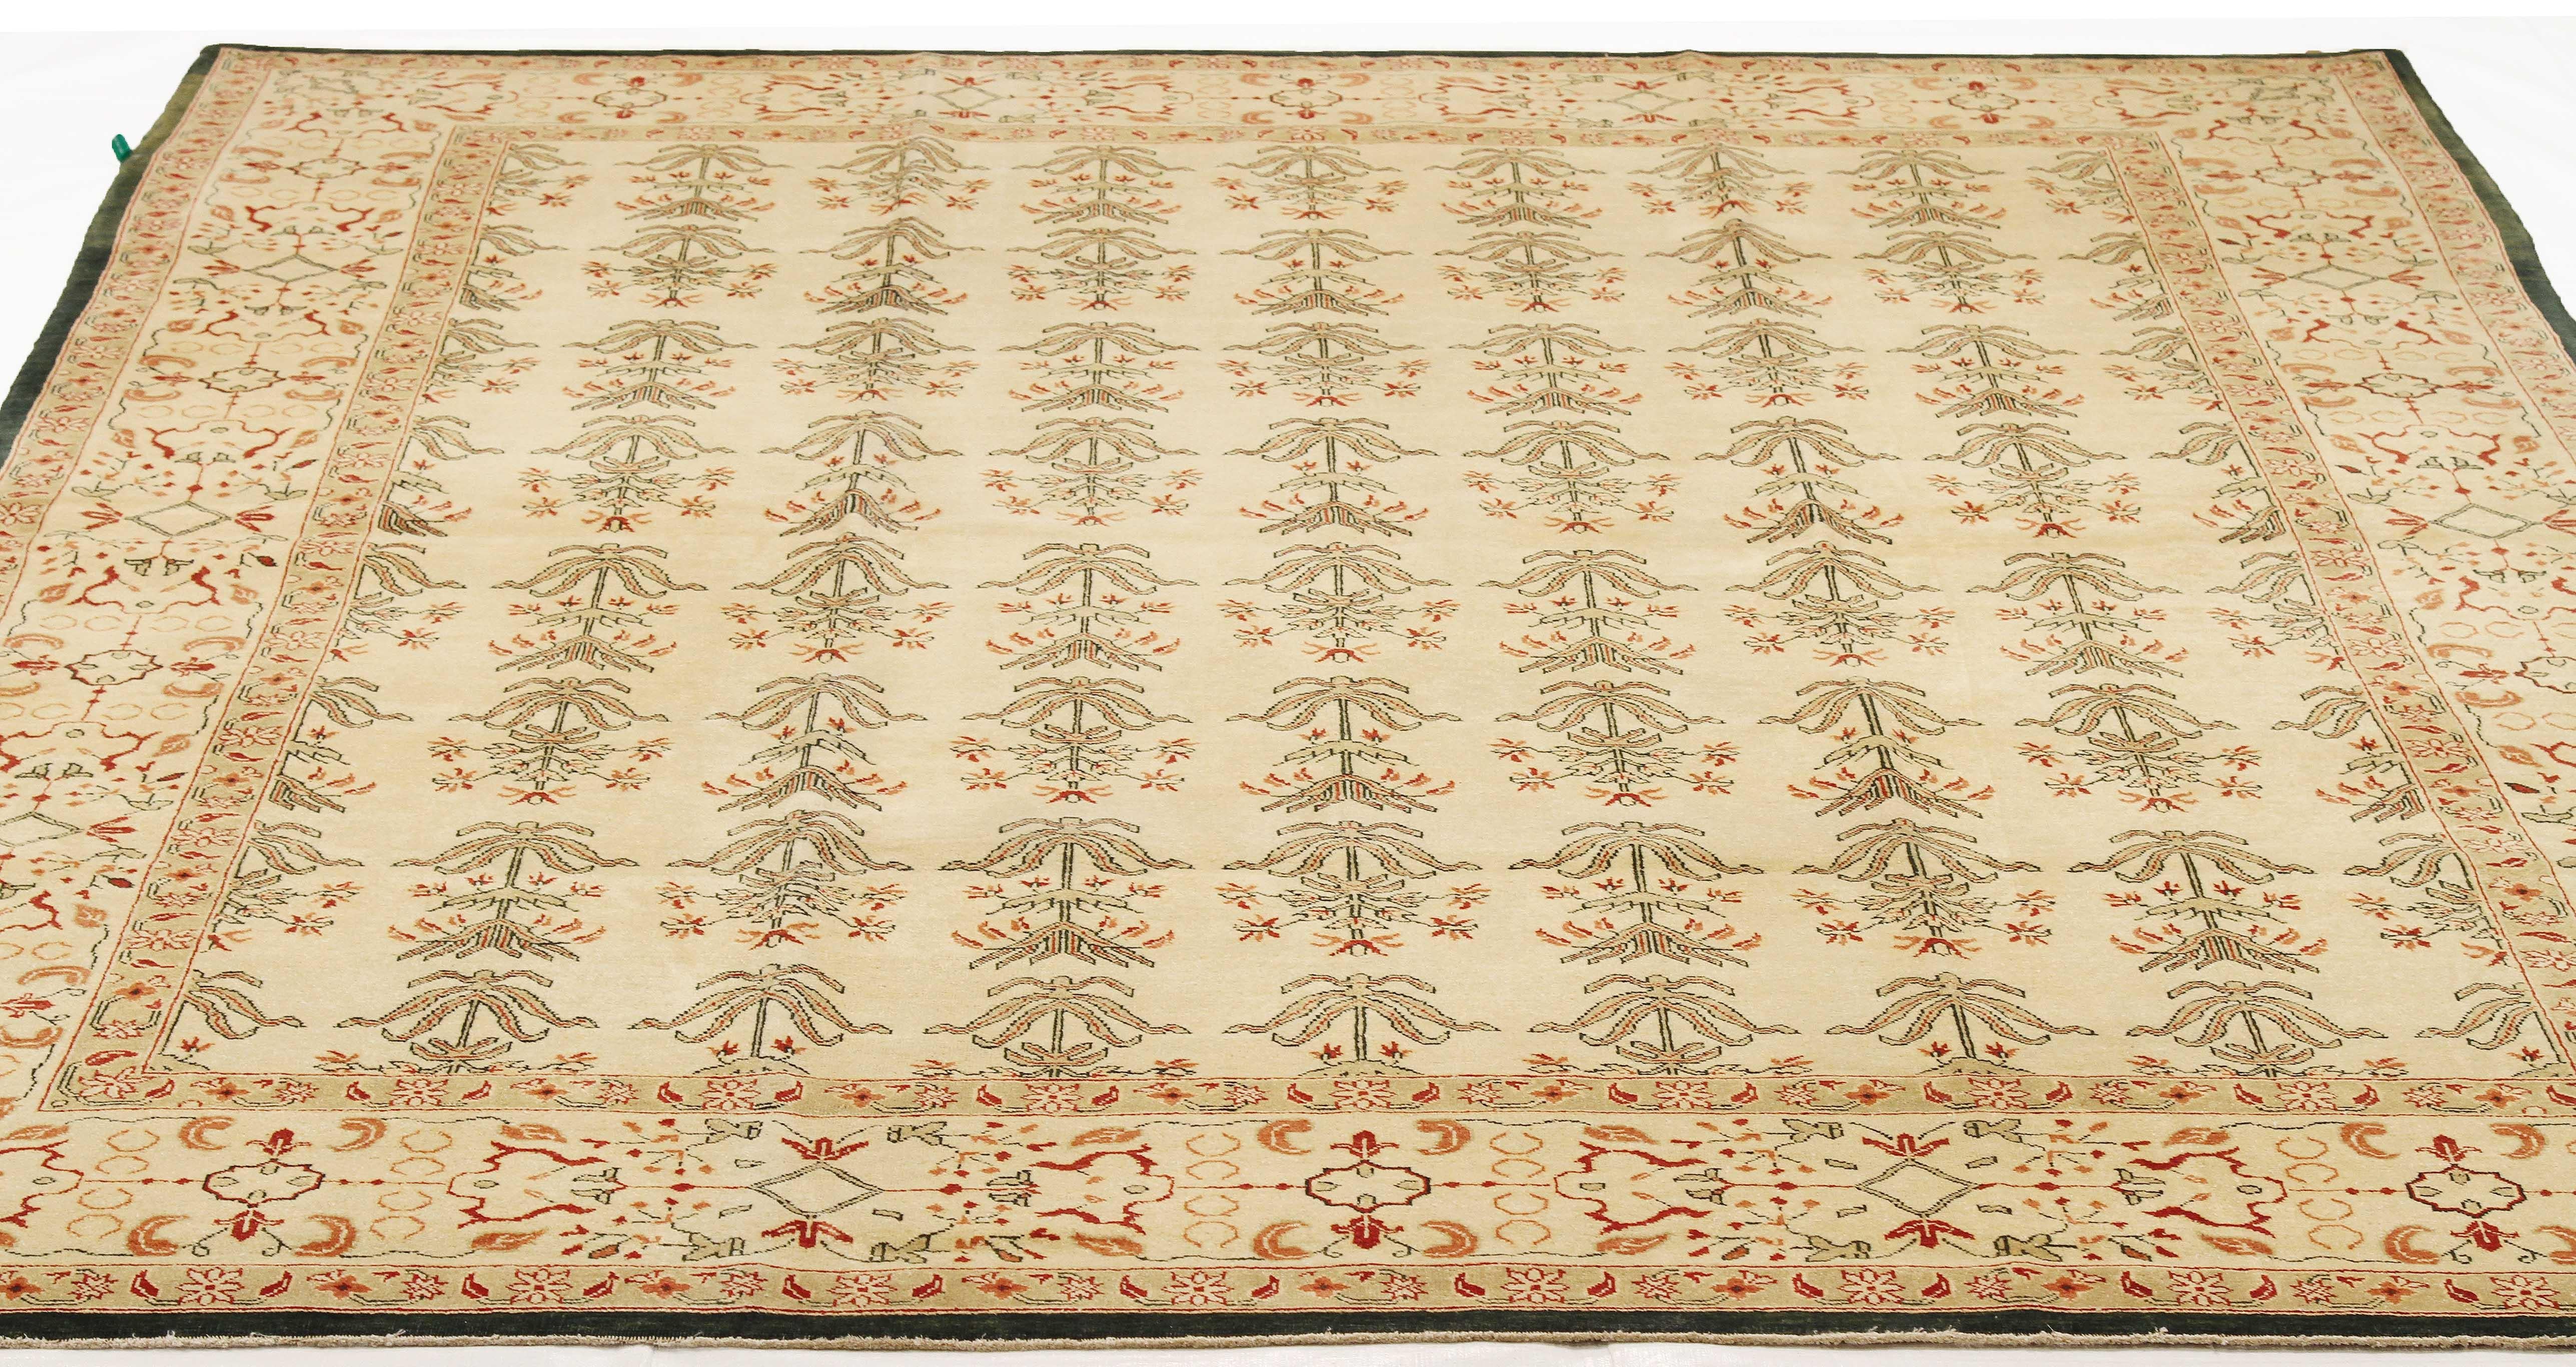 Turkish rug handwoven from the finest sheep’s wool and colored with all-natural vegetable dyes that are safe for humans and pets. It’s a traditional Agra weaving design featuring botanical patterns in beige and brown on a plush ivory field. It’s an